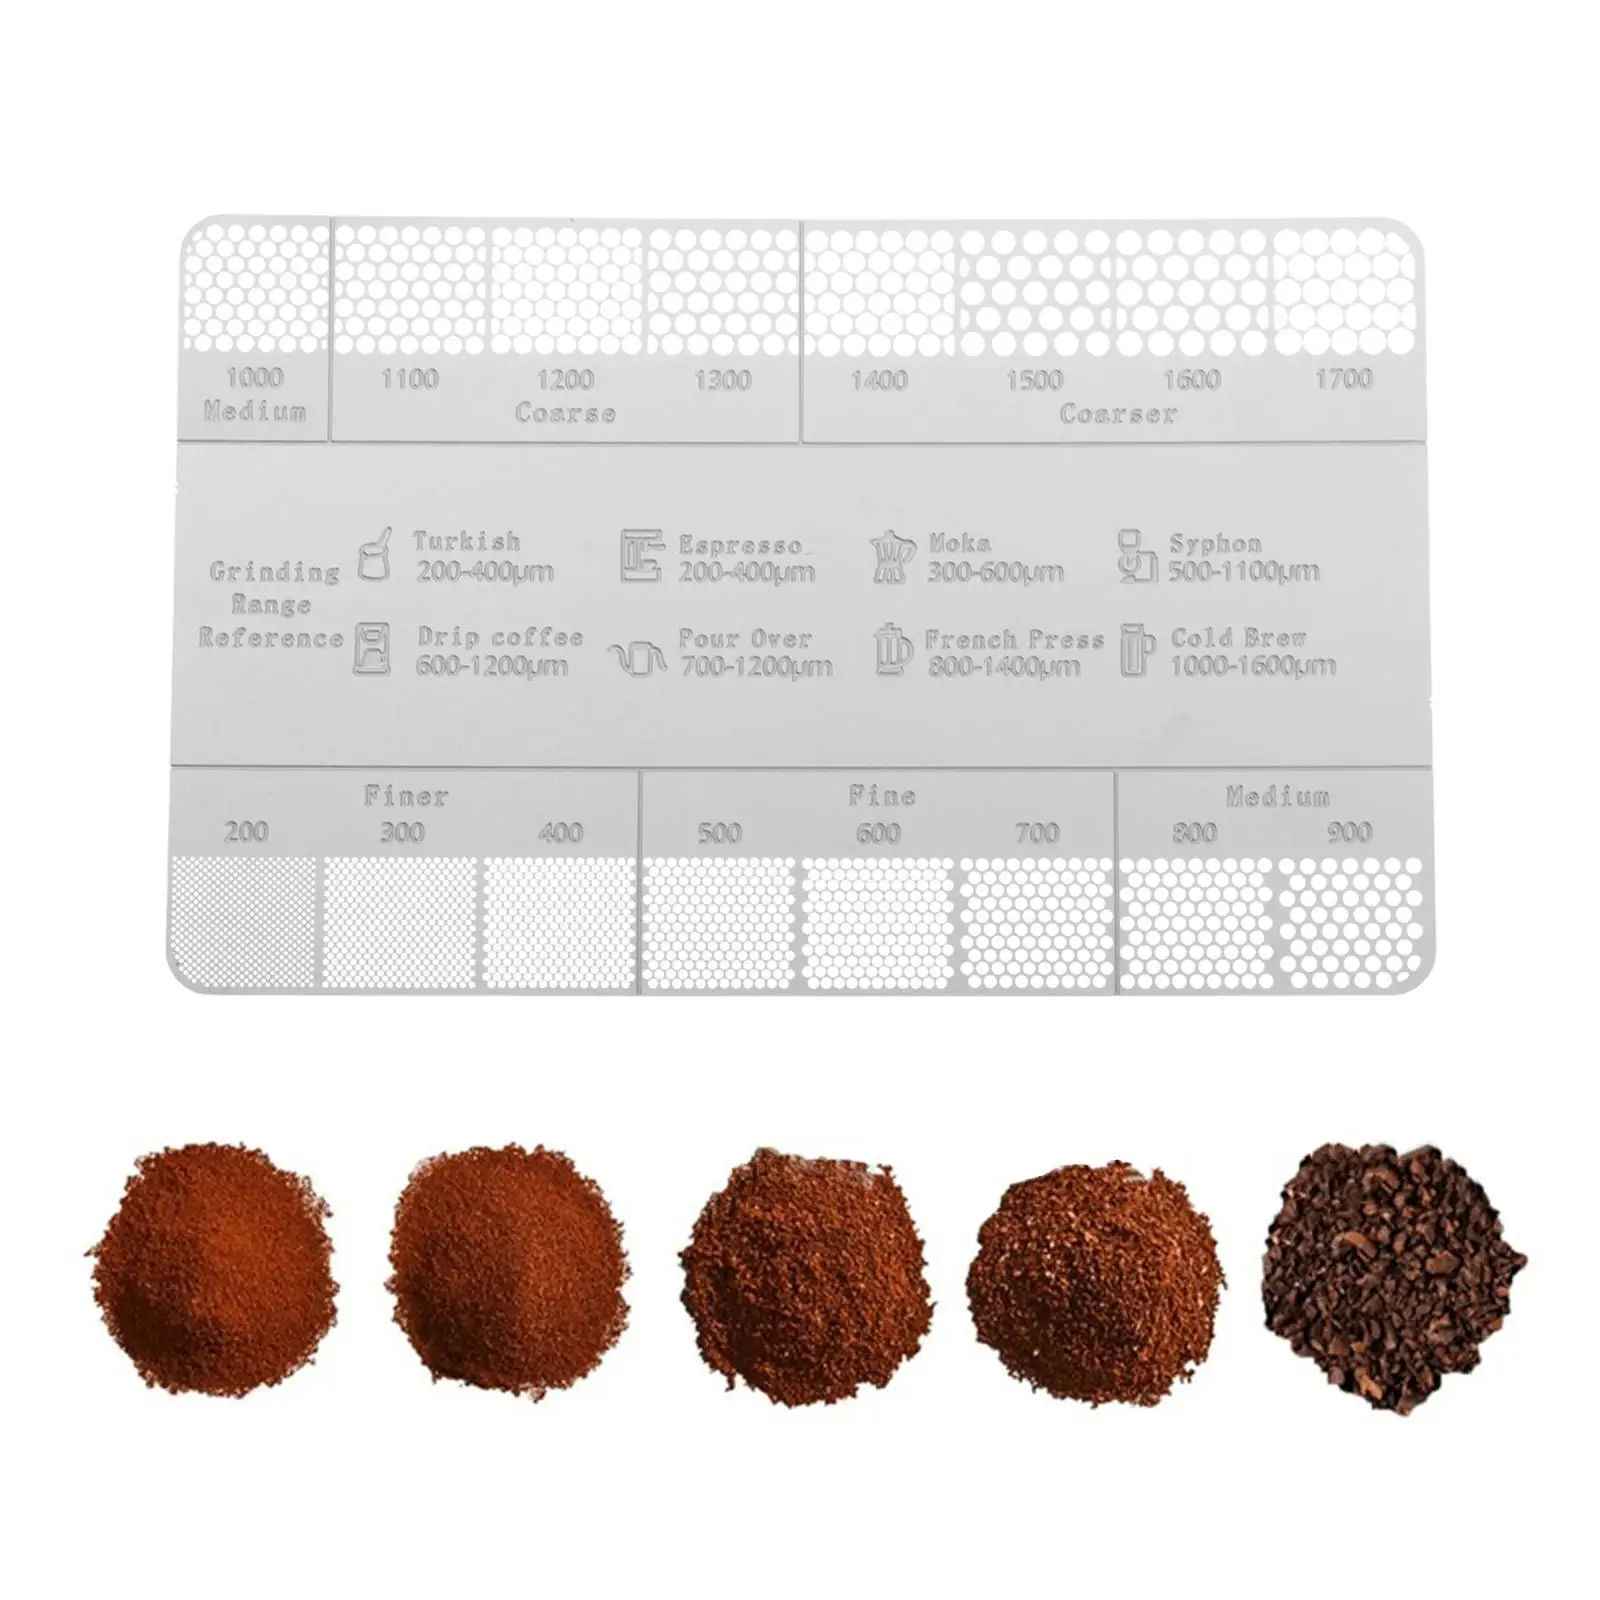 Ground coffee Sizes Measuring High Precision Measuring Tool Roughness Gauge Card Coffee Powder Size Scale for Coffee Maker Cafes